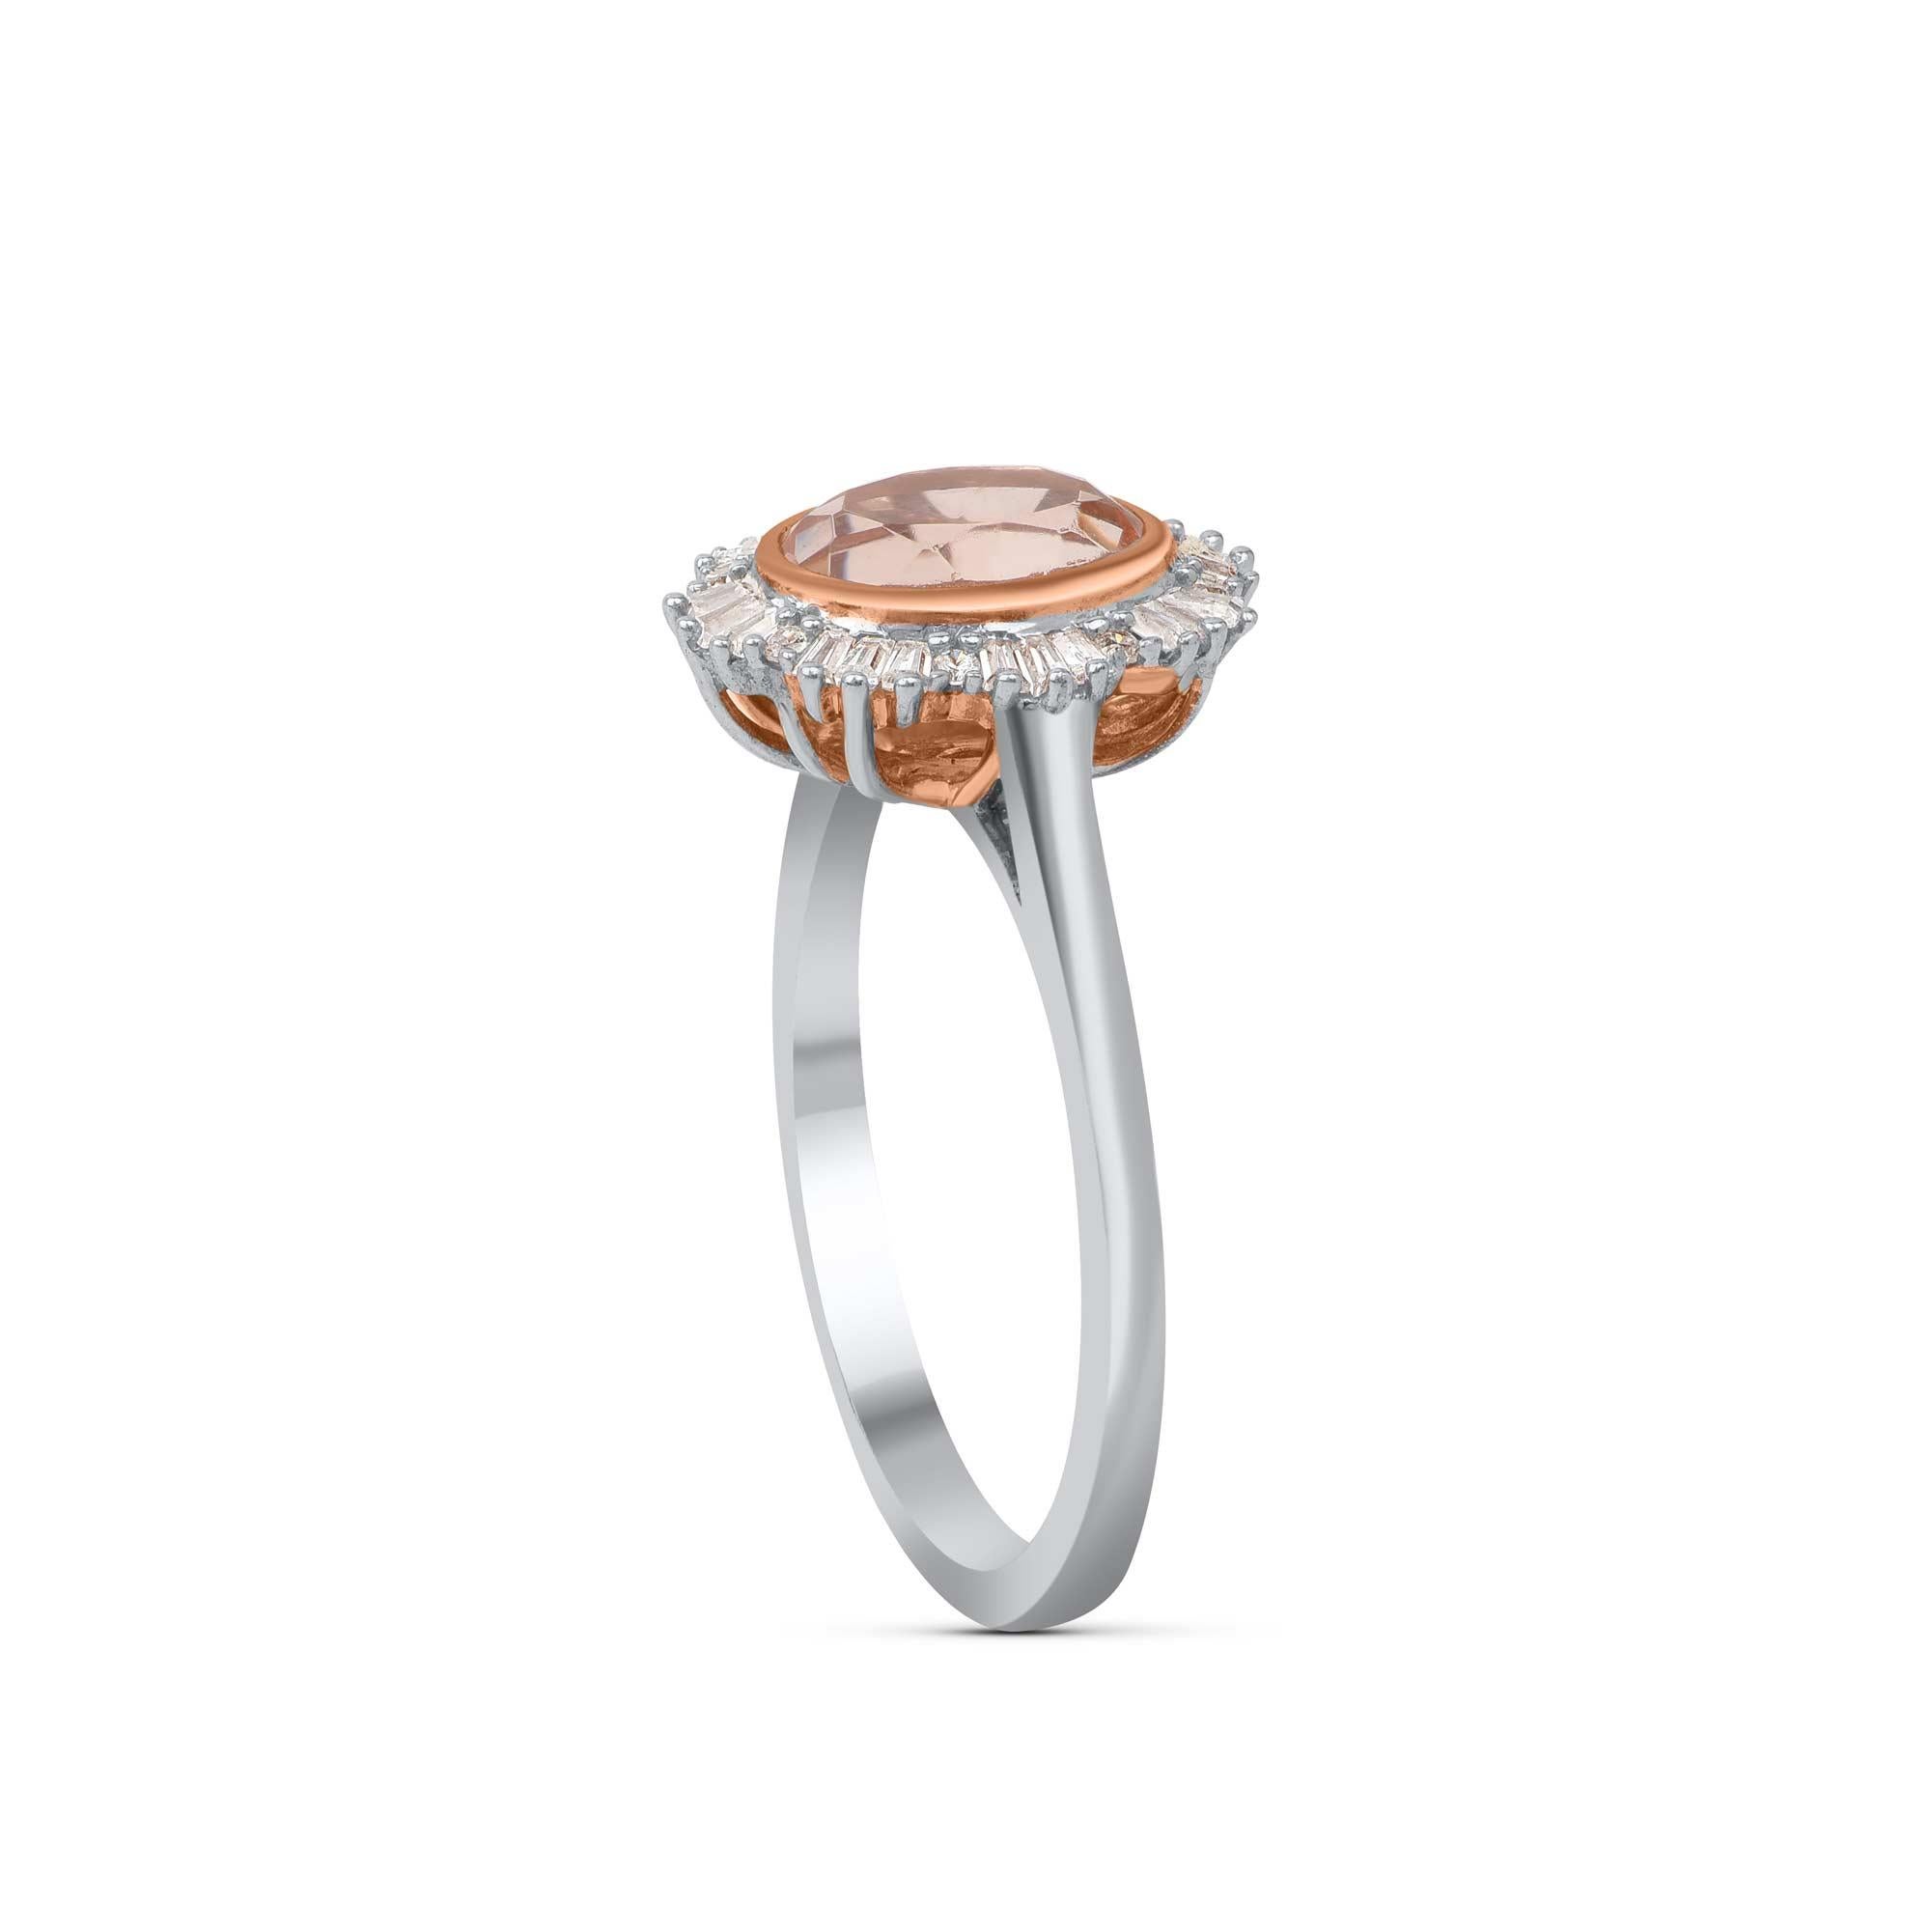 Dazzling with 8 brilliant, 24 baguette diamonds and 1 morganite gemstone elegantly set in prong setting and crafted beautifully in 18 KT rose gold. Diamonds are graded H-I Color, I2 Clarity. 

Metal color and ring size can be customized on request.